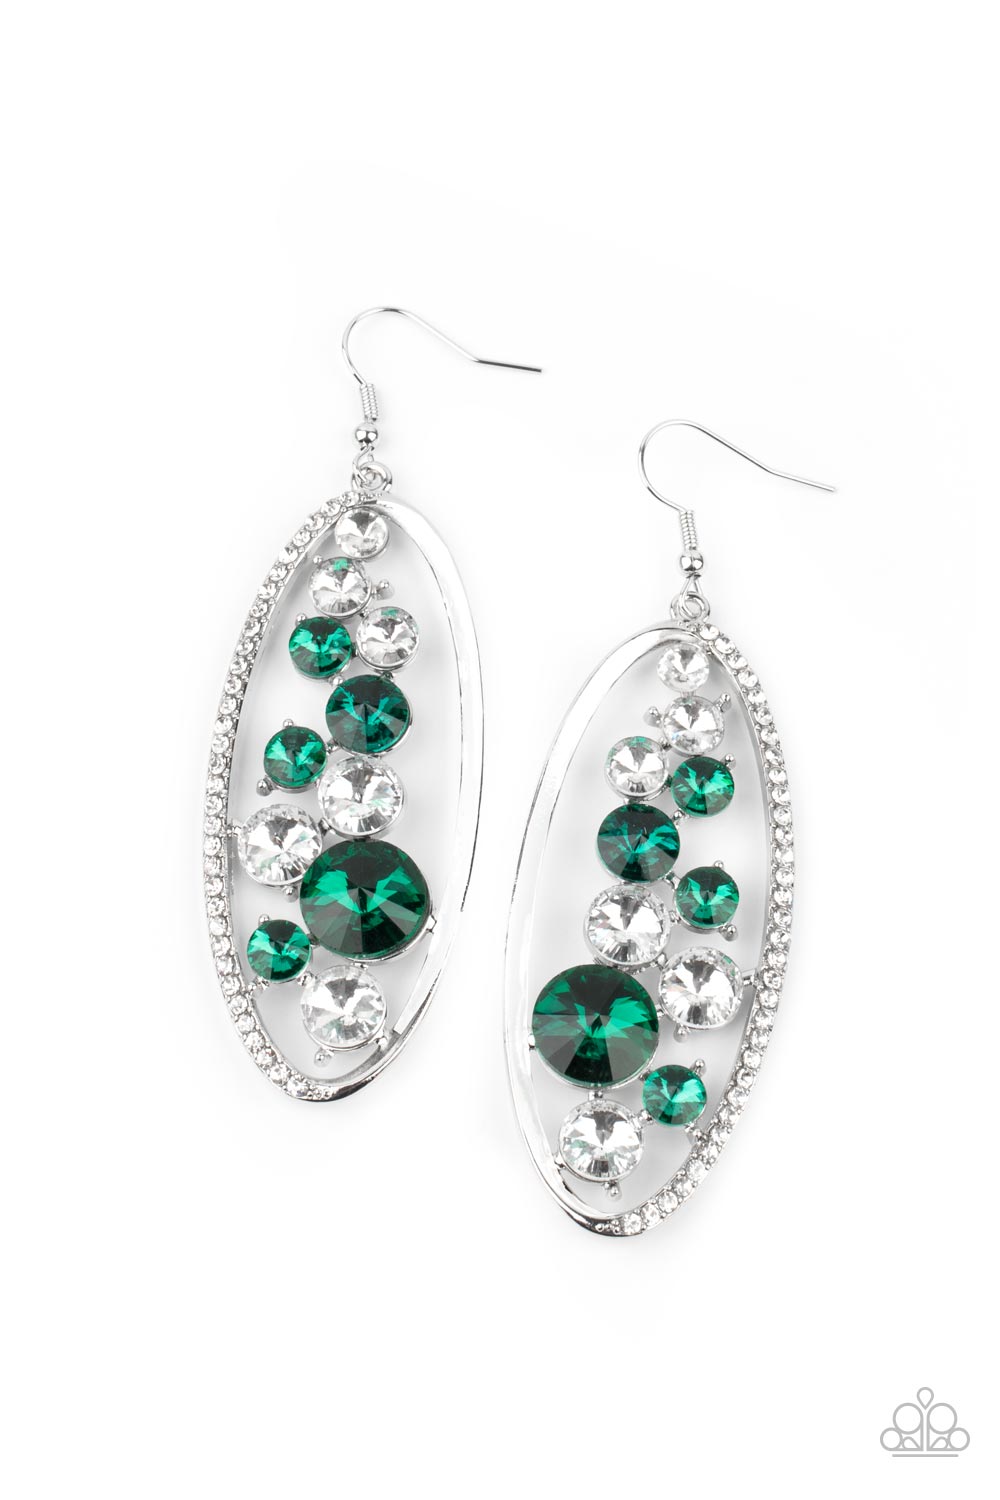 Rock Candy Bubbly - Green and Silver Earrings - Paparazzi Accessories - An oversized collection of glassy white and glittery green rhinestones sparkle inside a silver oval frame. One side of the frame is encrusted in dainty white rhinestones, adding a refined flair to the bubbly lure. Earring attaches to a standard fishhook fitting. Sold as one pair of earrings.